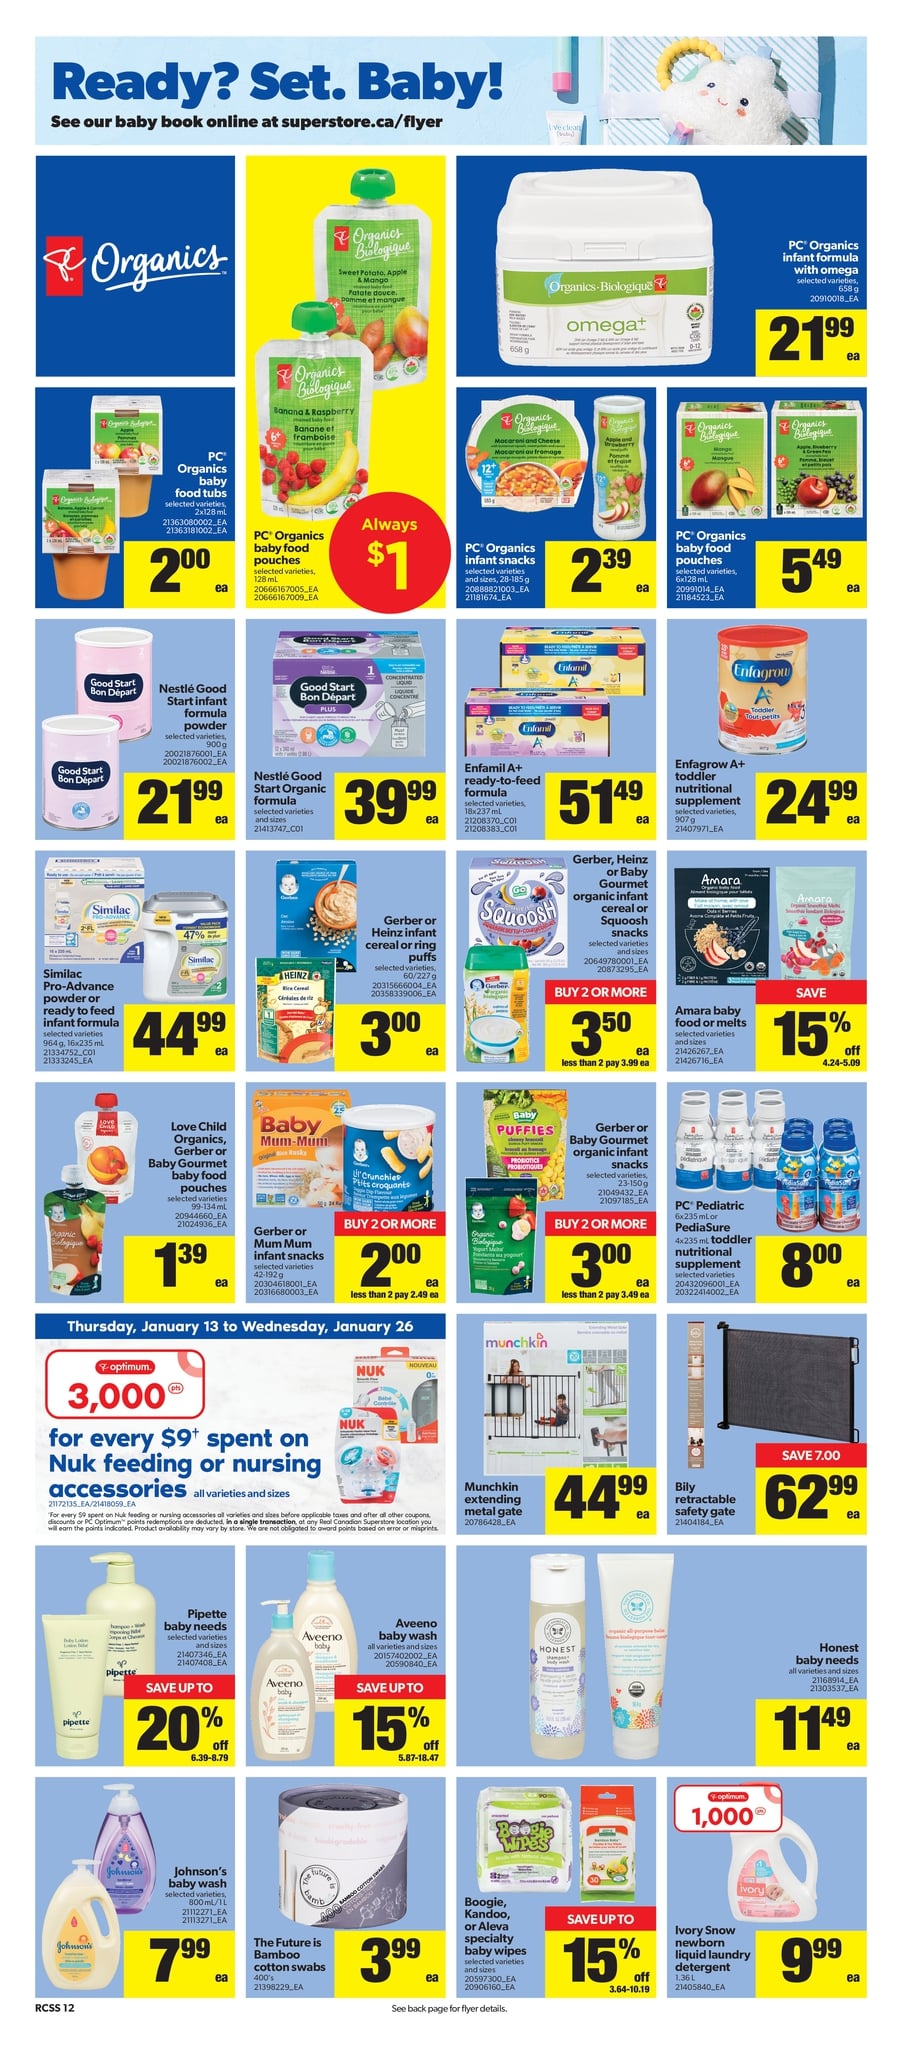 Real Canadian Superstore Ontario - Weekly Flyer Specials - Page 12